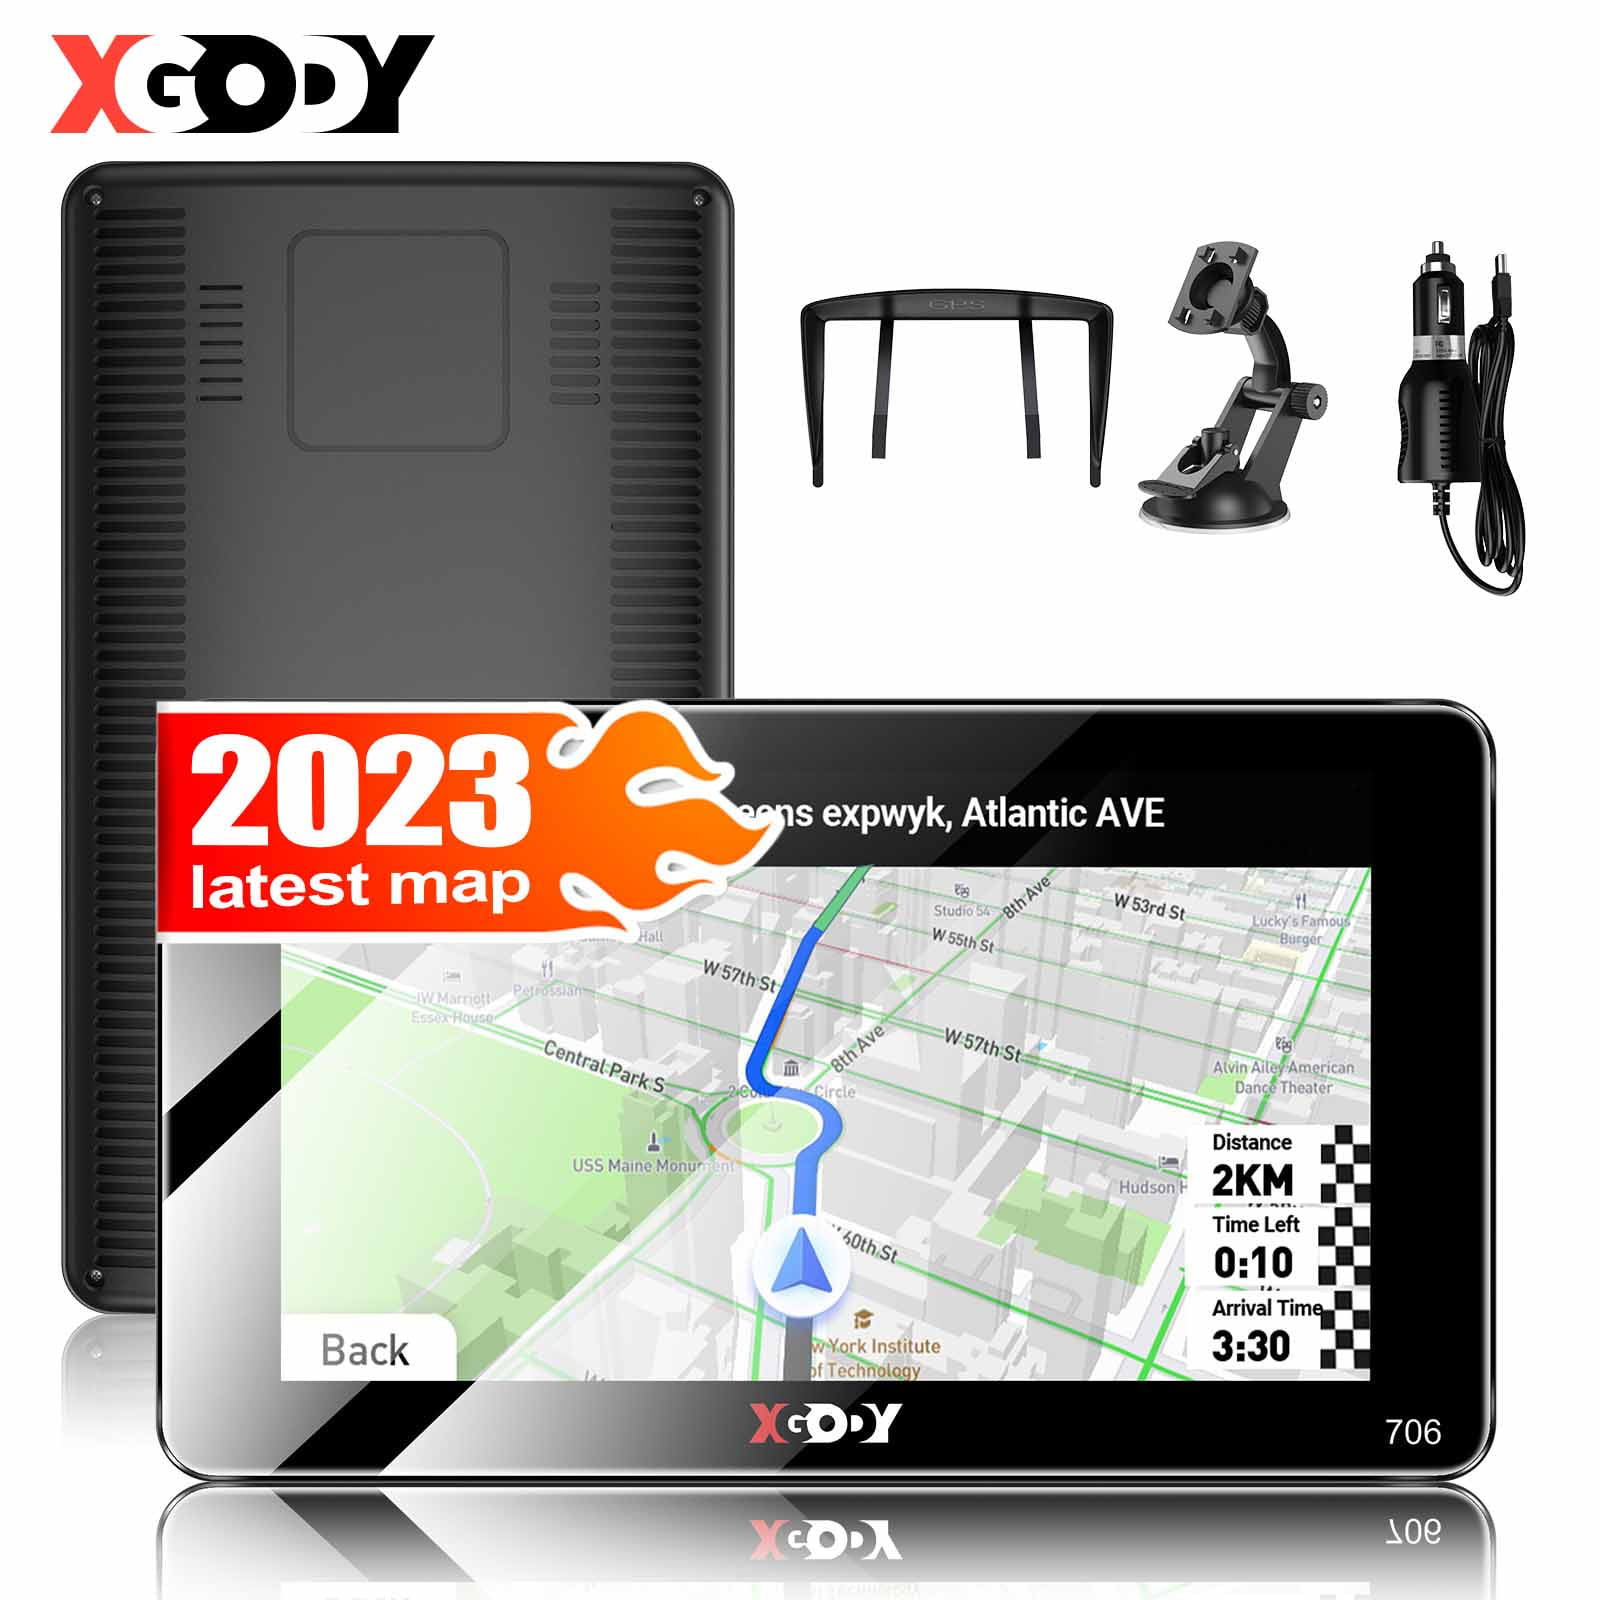 Jeg vasker mit tøj overskud Selskab XGODY 2.5D Screen GPS Navigation for car 7 inch 2023 maps car GPS for car  Truck GPS Commercial Drivers semi Trucker Navigation System 8GB 256M with  Voice Guidance Free Lifetime map Updates -